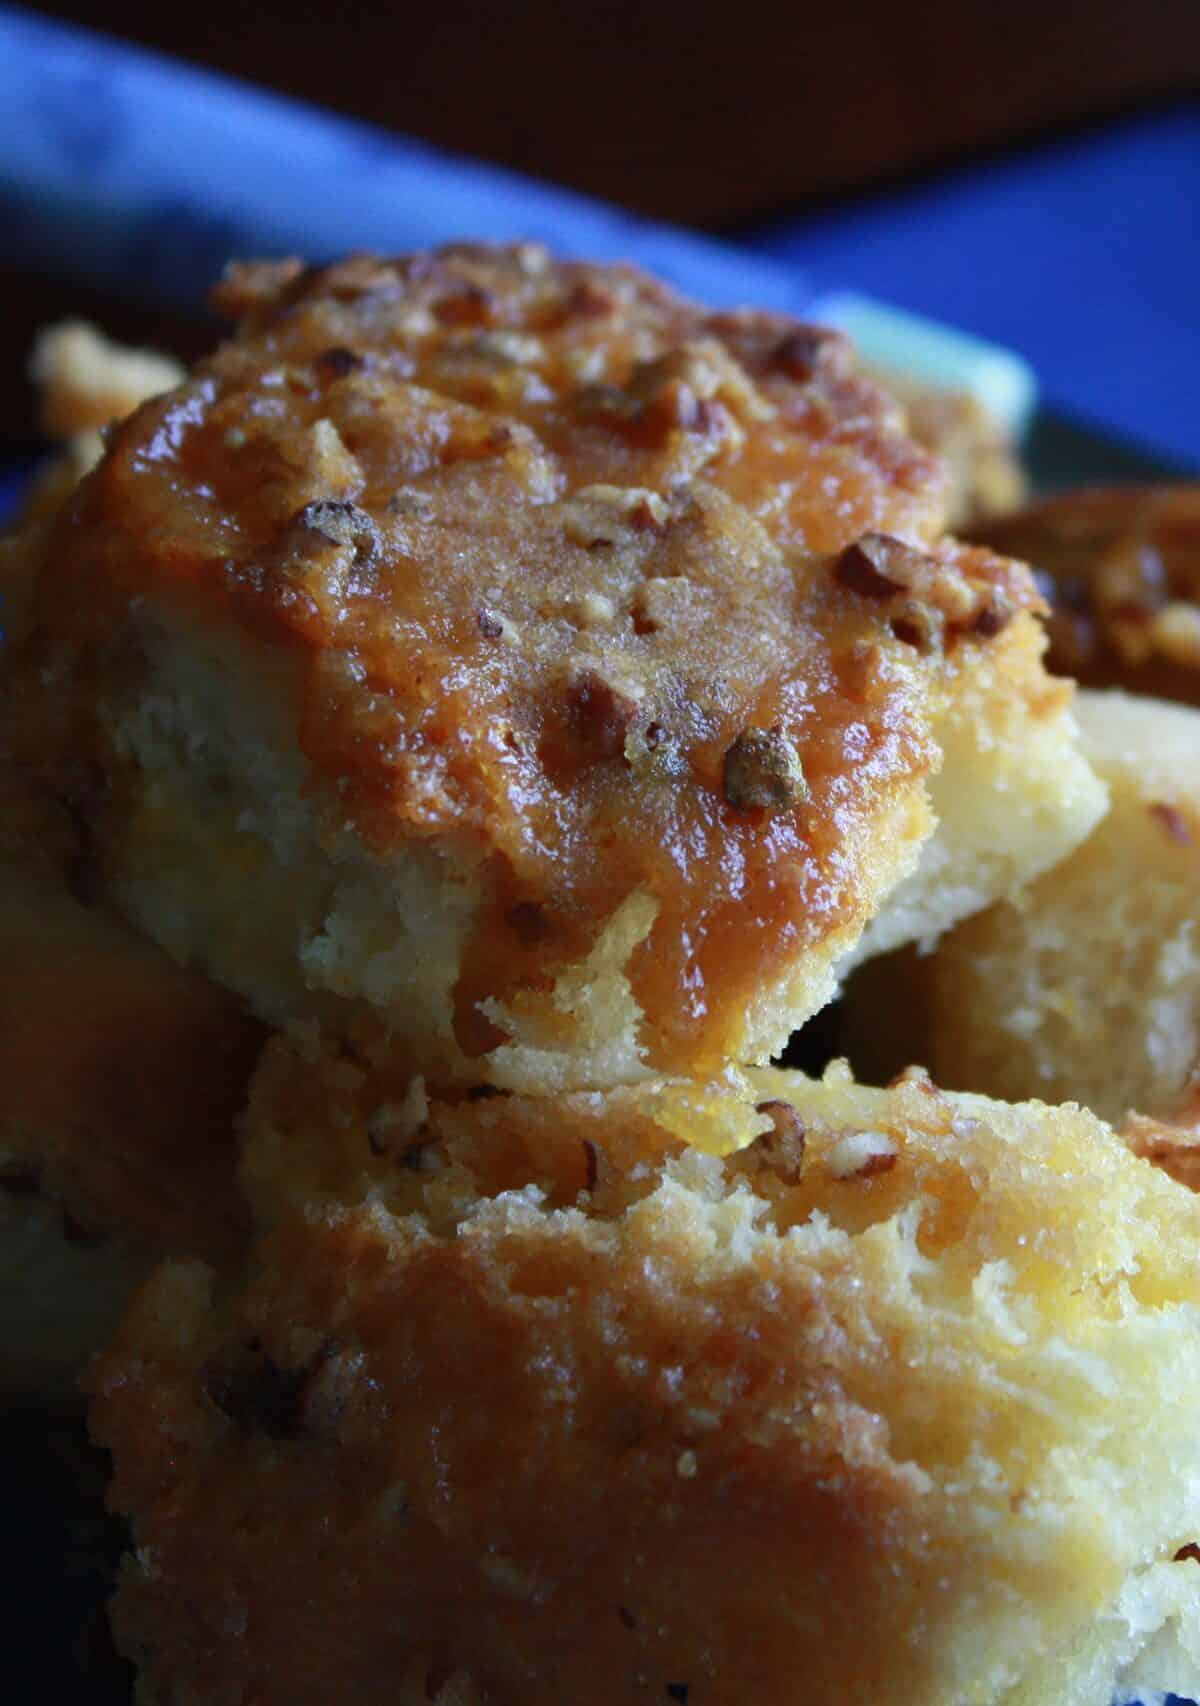  The warm and gooey goodness of Cindy’s Monkey Bread will make your taste buds dance.